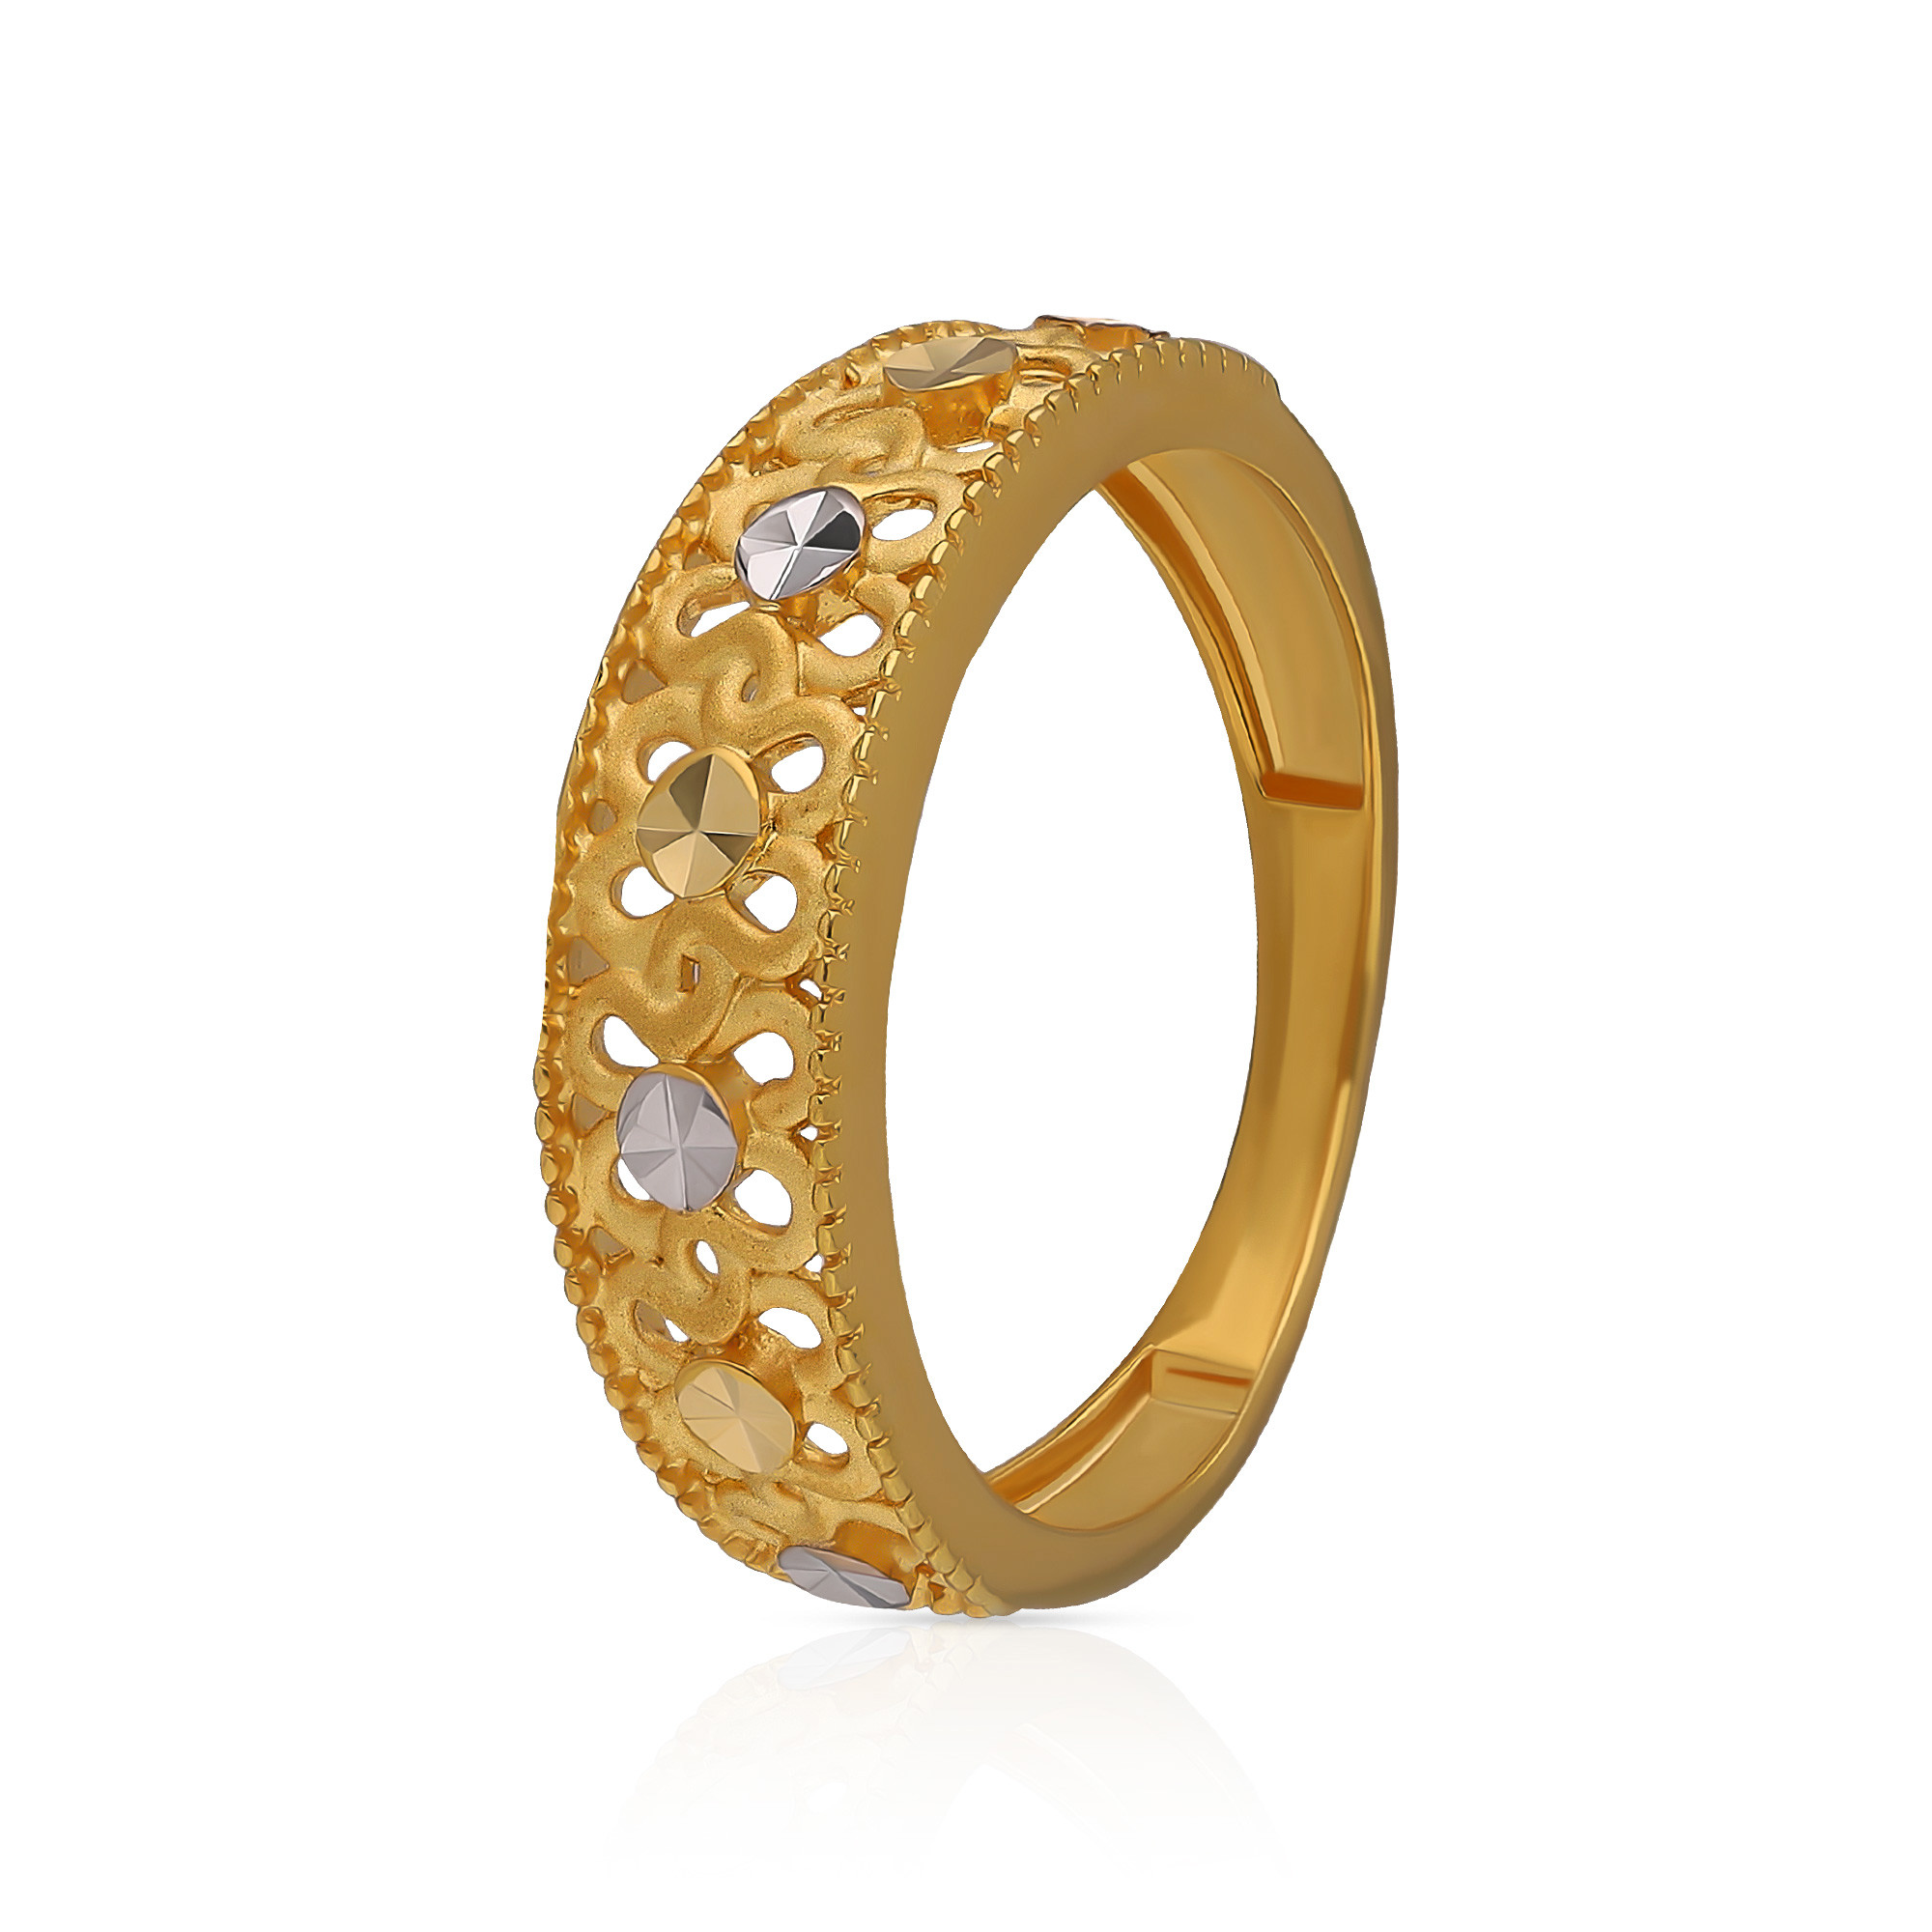 Buy MALABAR GOLD AND DIAMONDS Mens Gold Ring FRANDZ0052 Size 22 | Shoppers  Stop